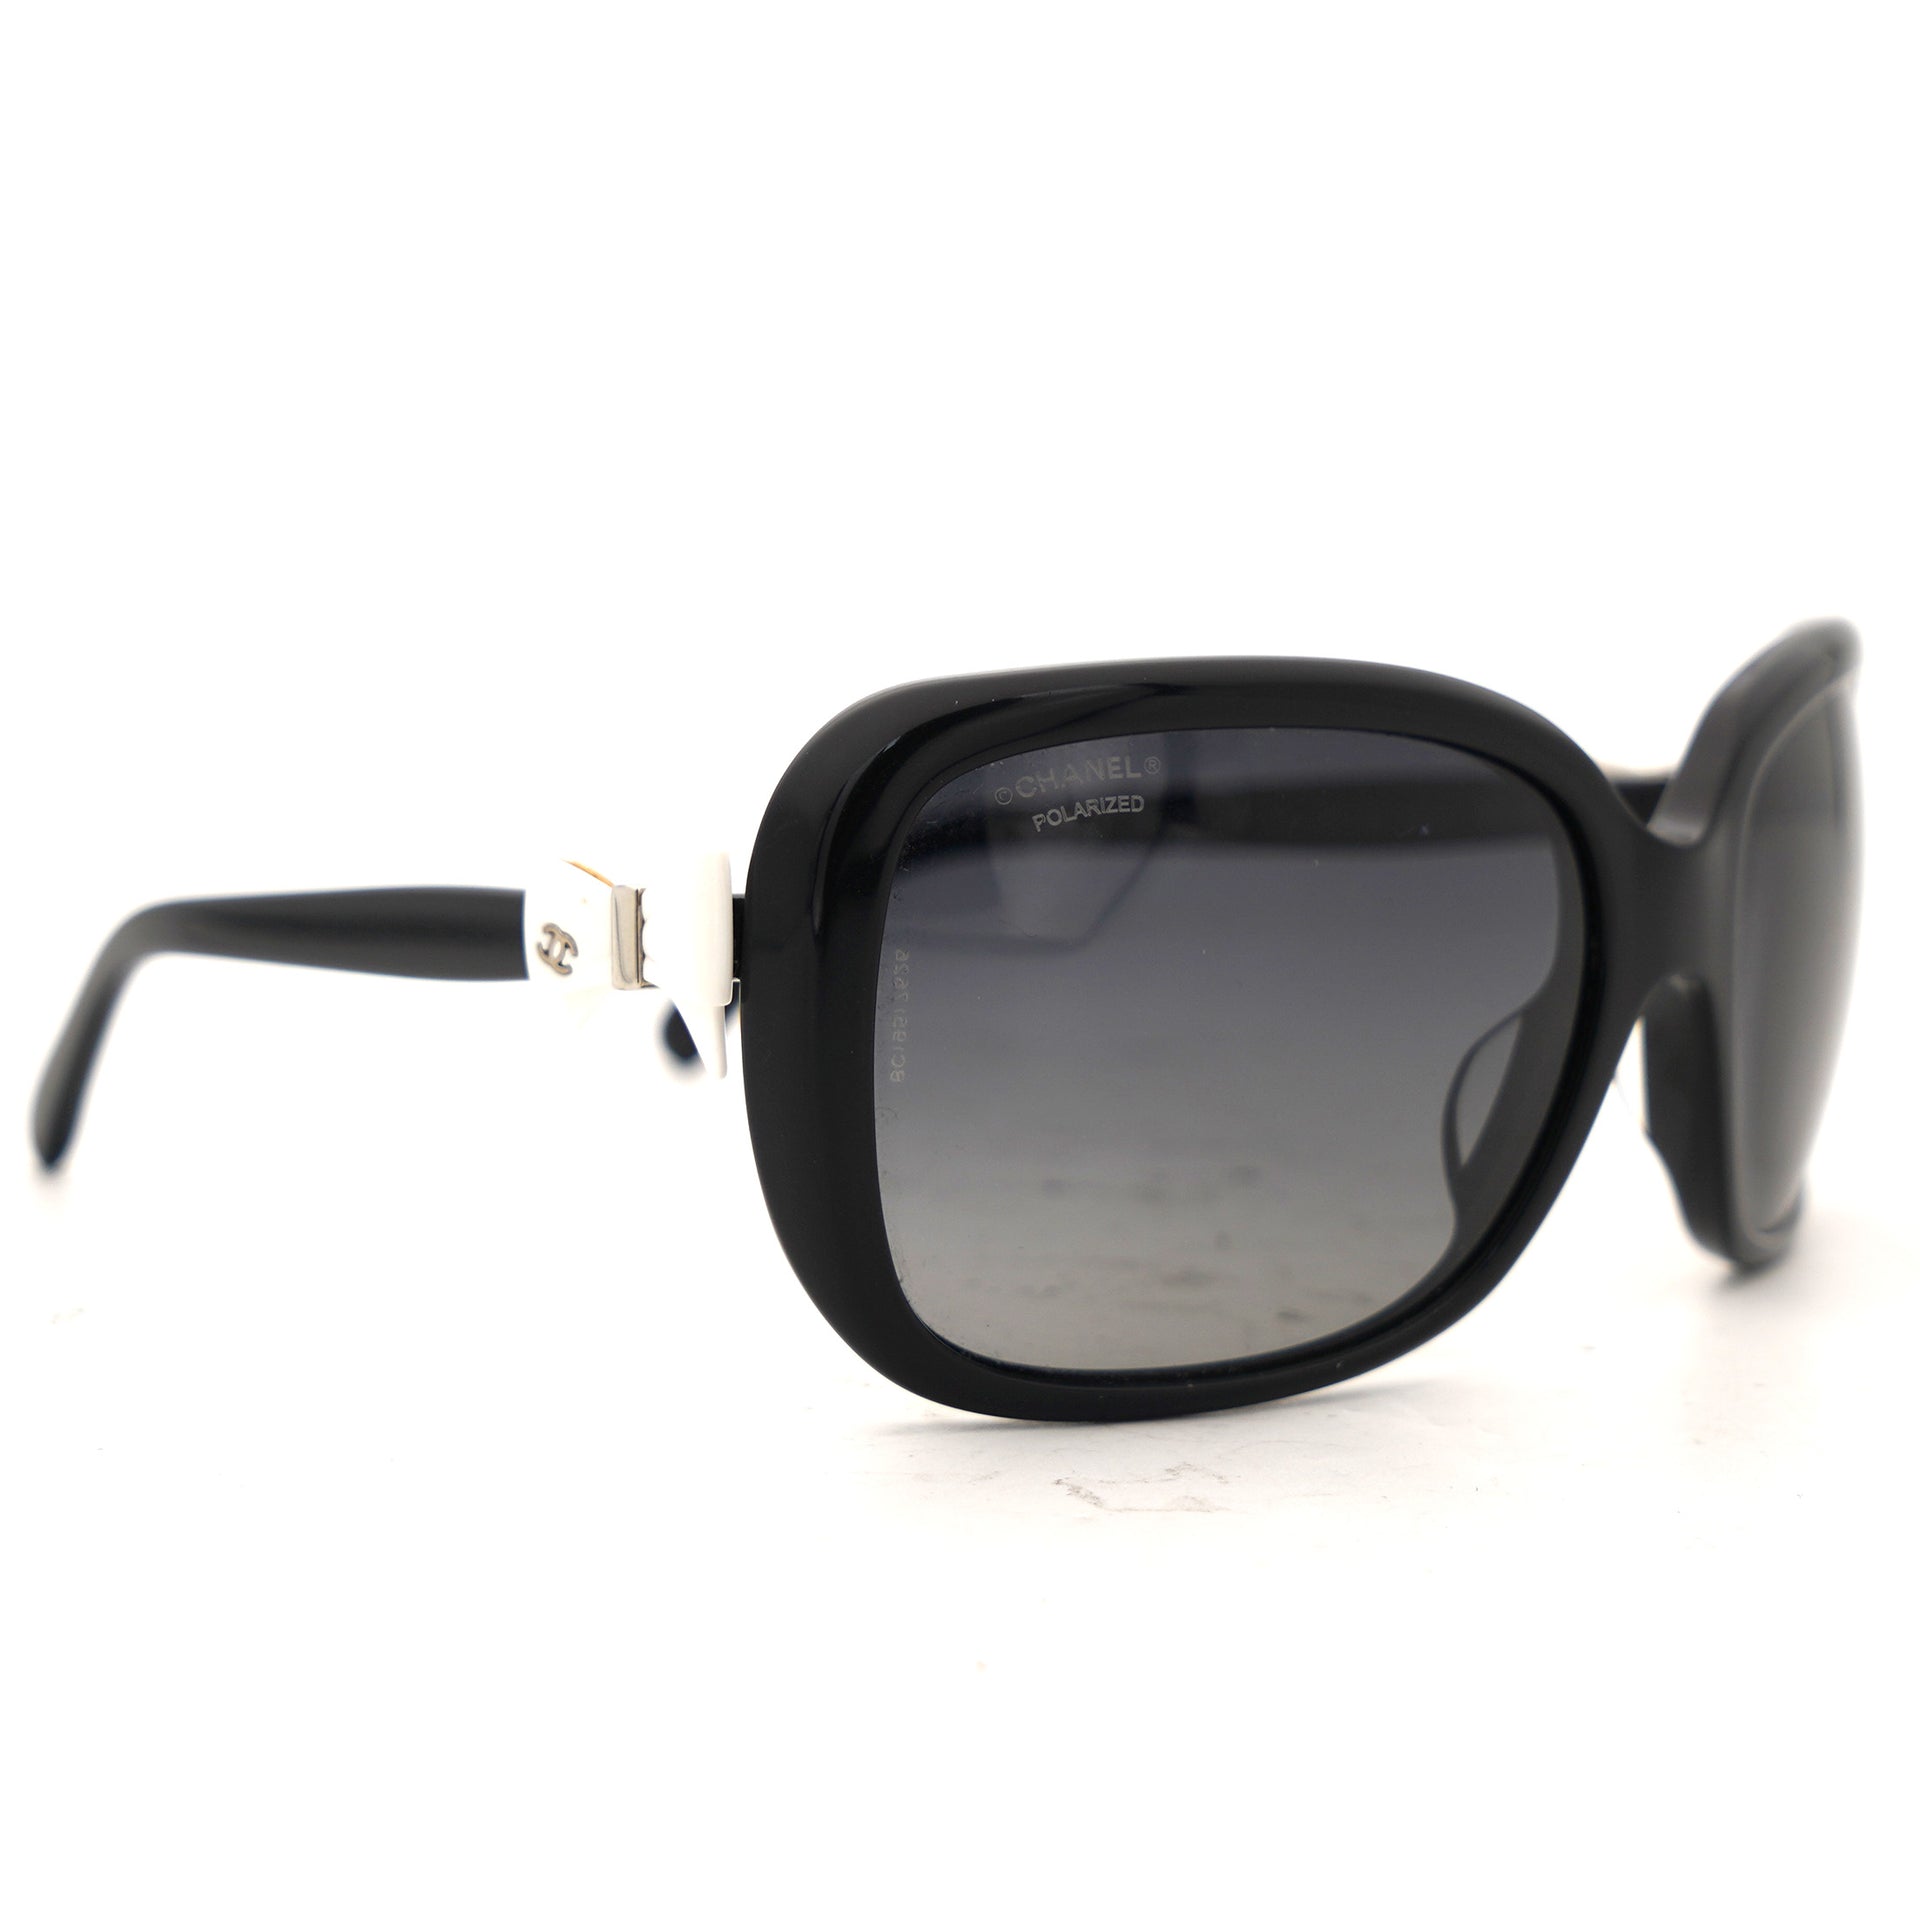 CHANEL Black Sunglasses with White Bow 5171-US